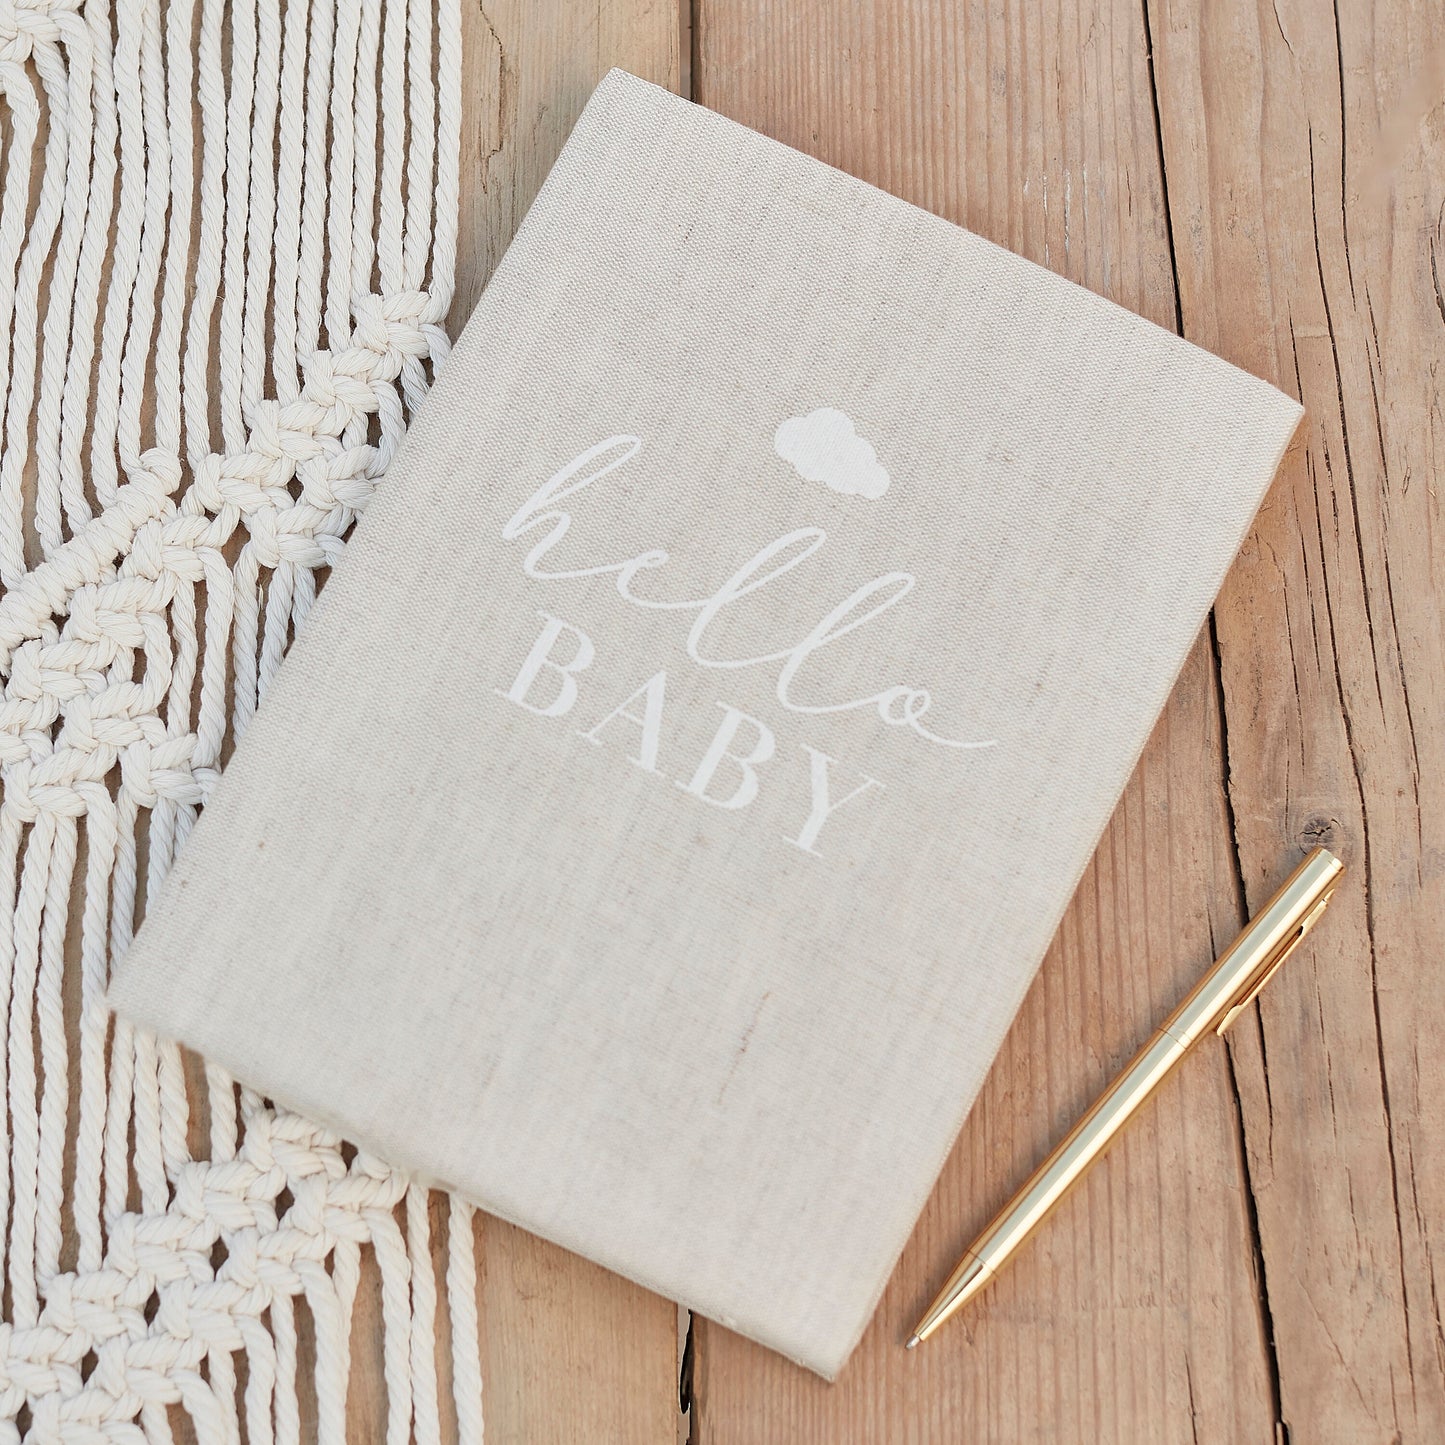 Hello Baby Guest Book / Memory Book / Journal